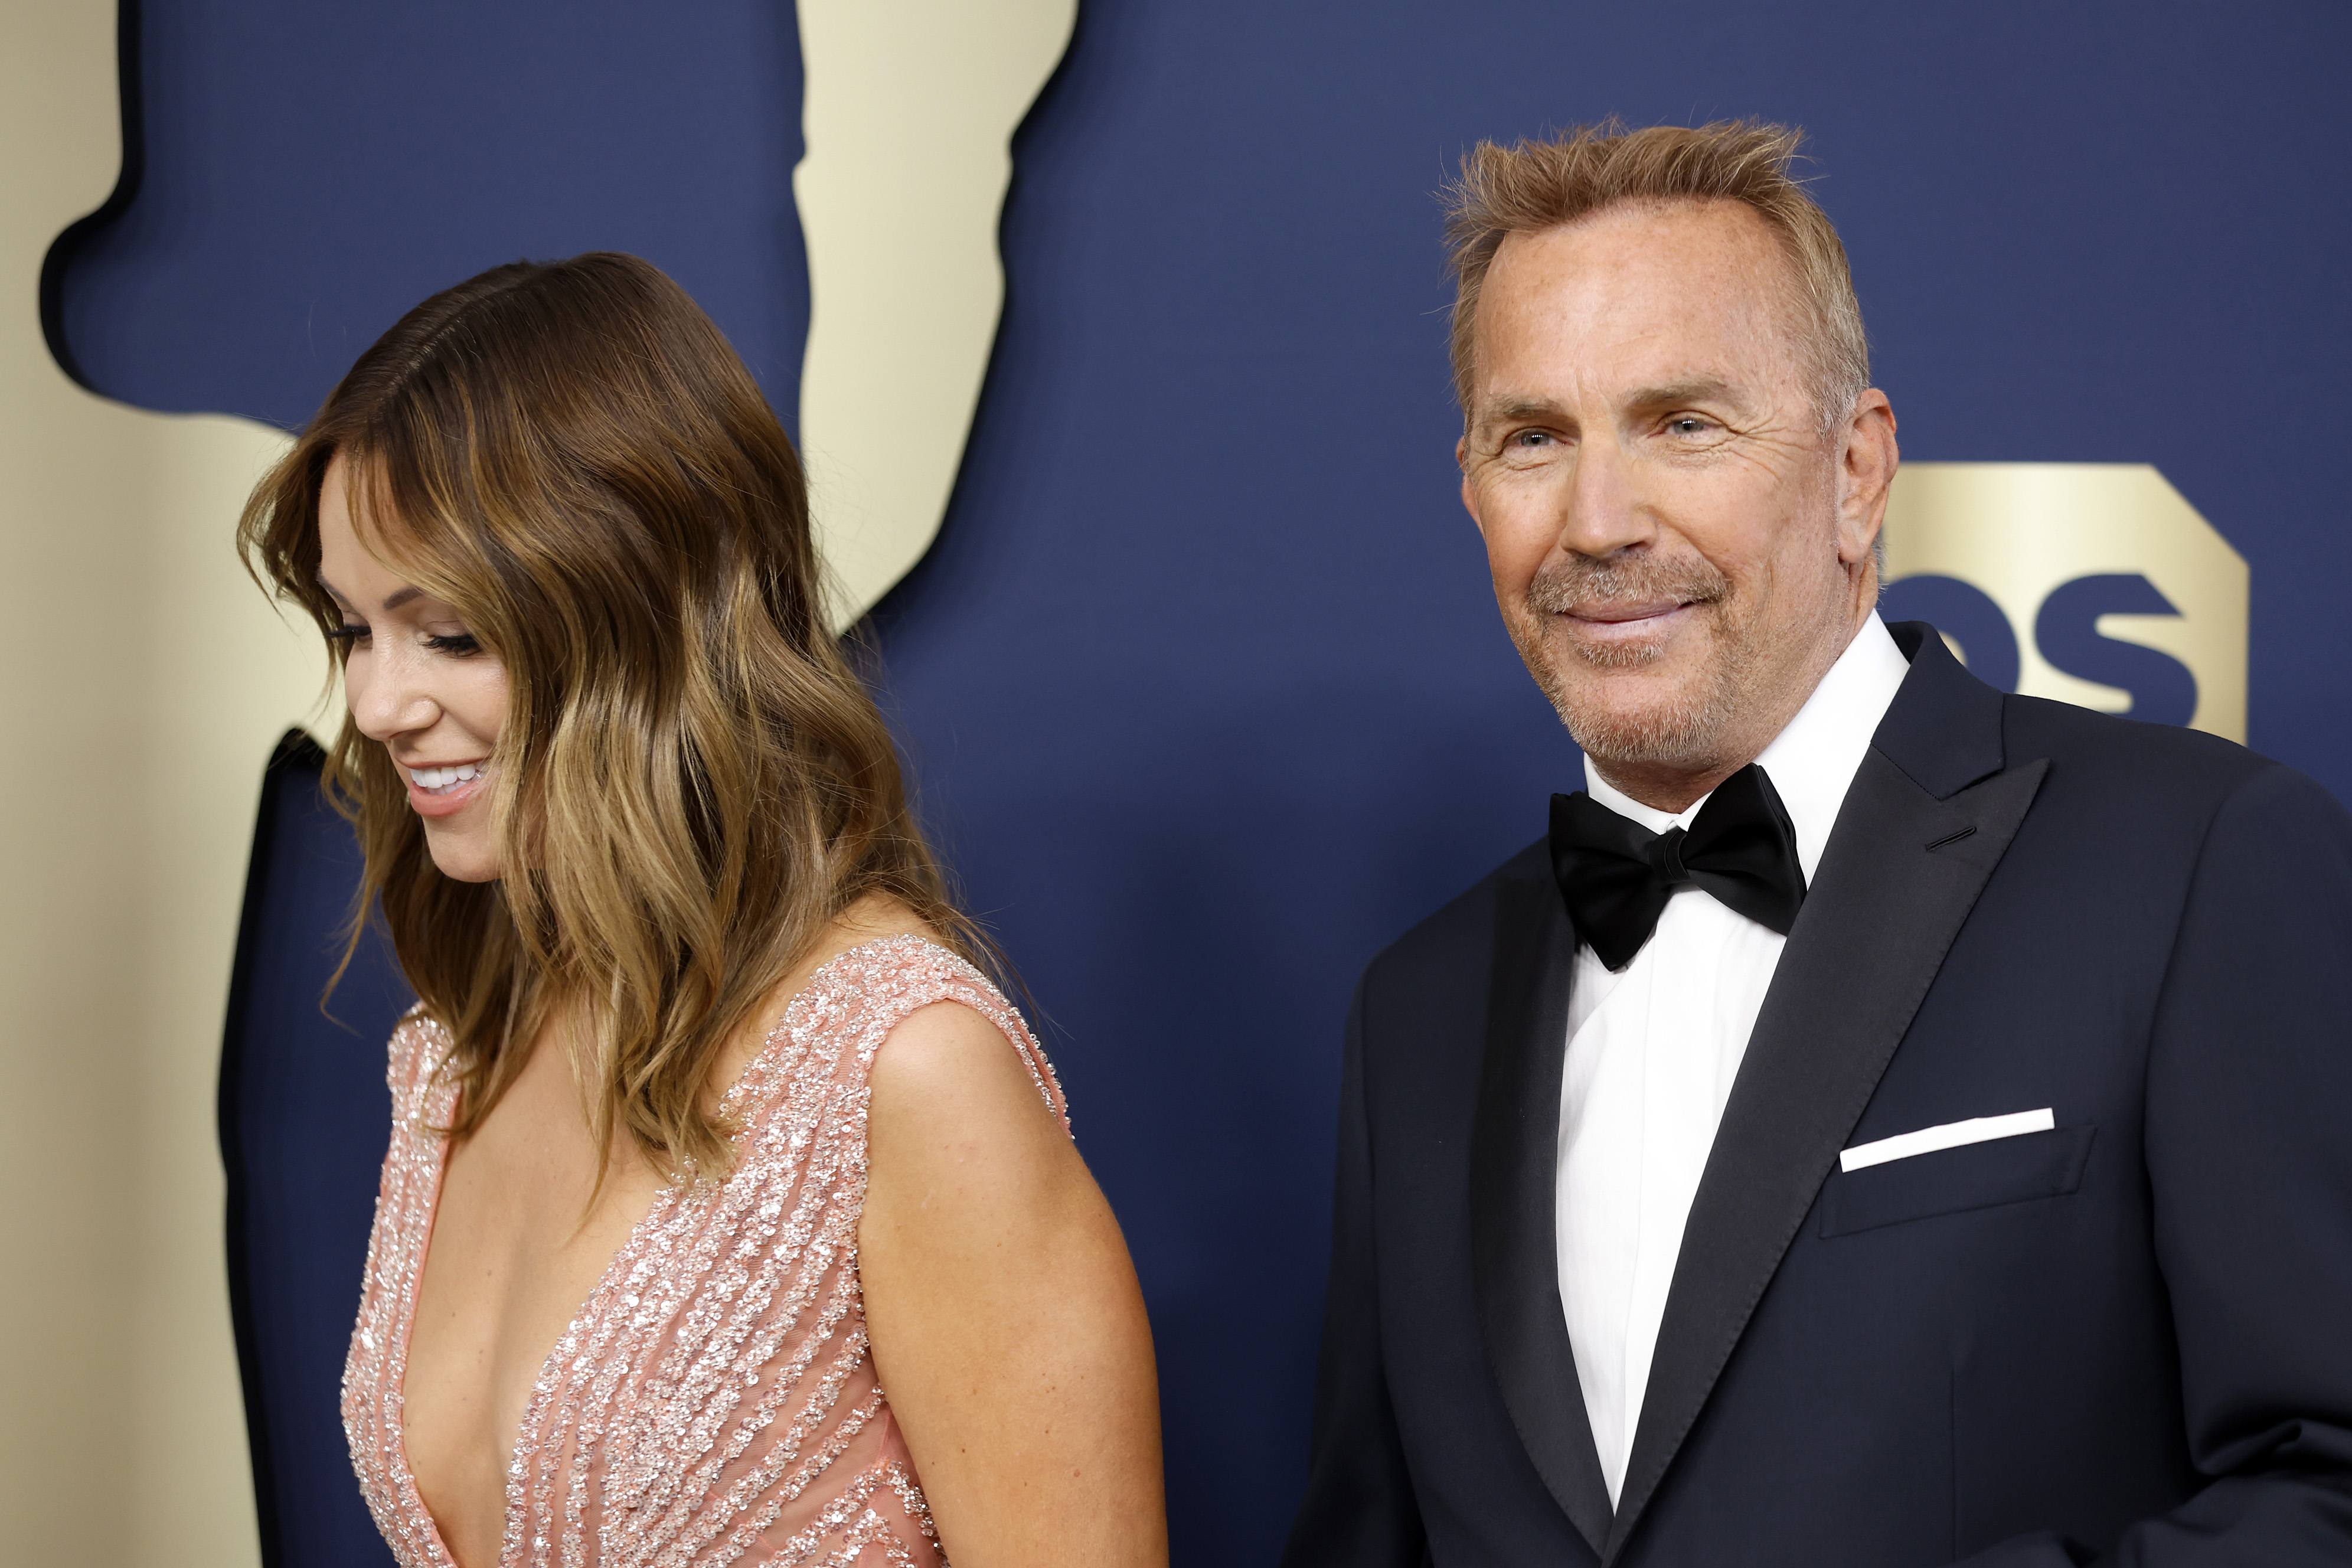 Christine Baumgartner and Kevin Costner at the 28th Annual Screen Actors Guild Awards on February 27, 2022, in Santa Monica, California | Source: Getty Images